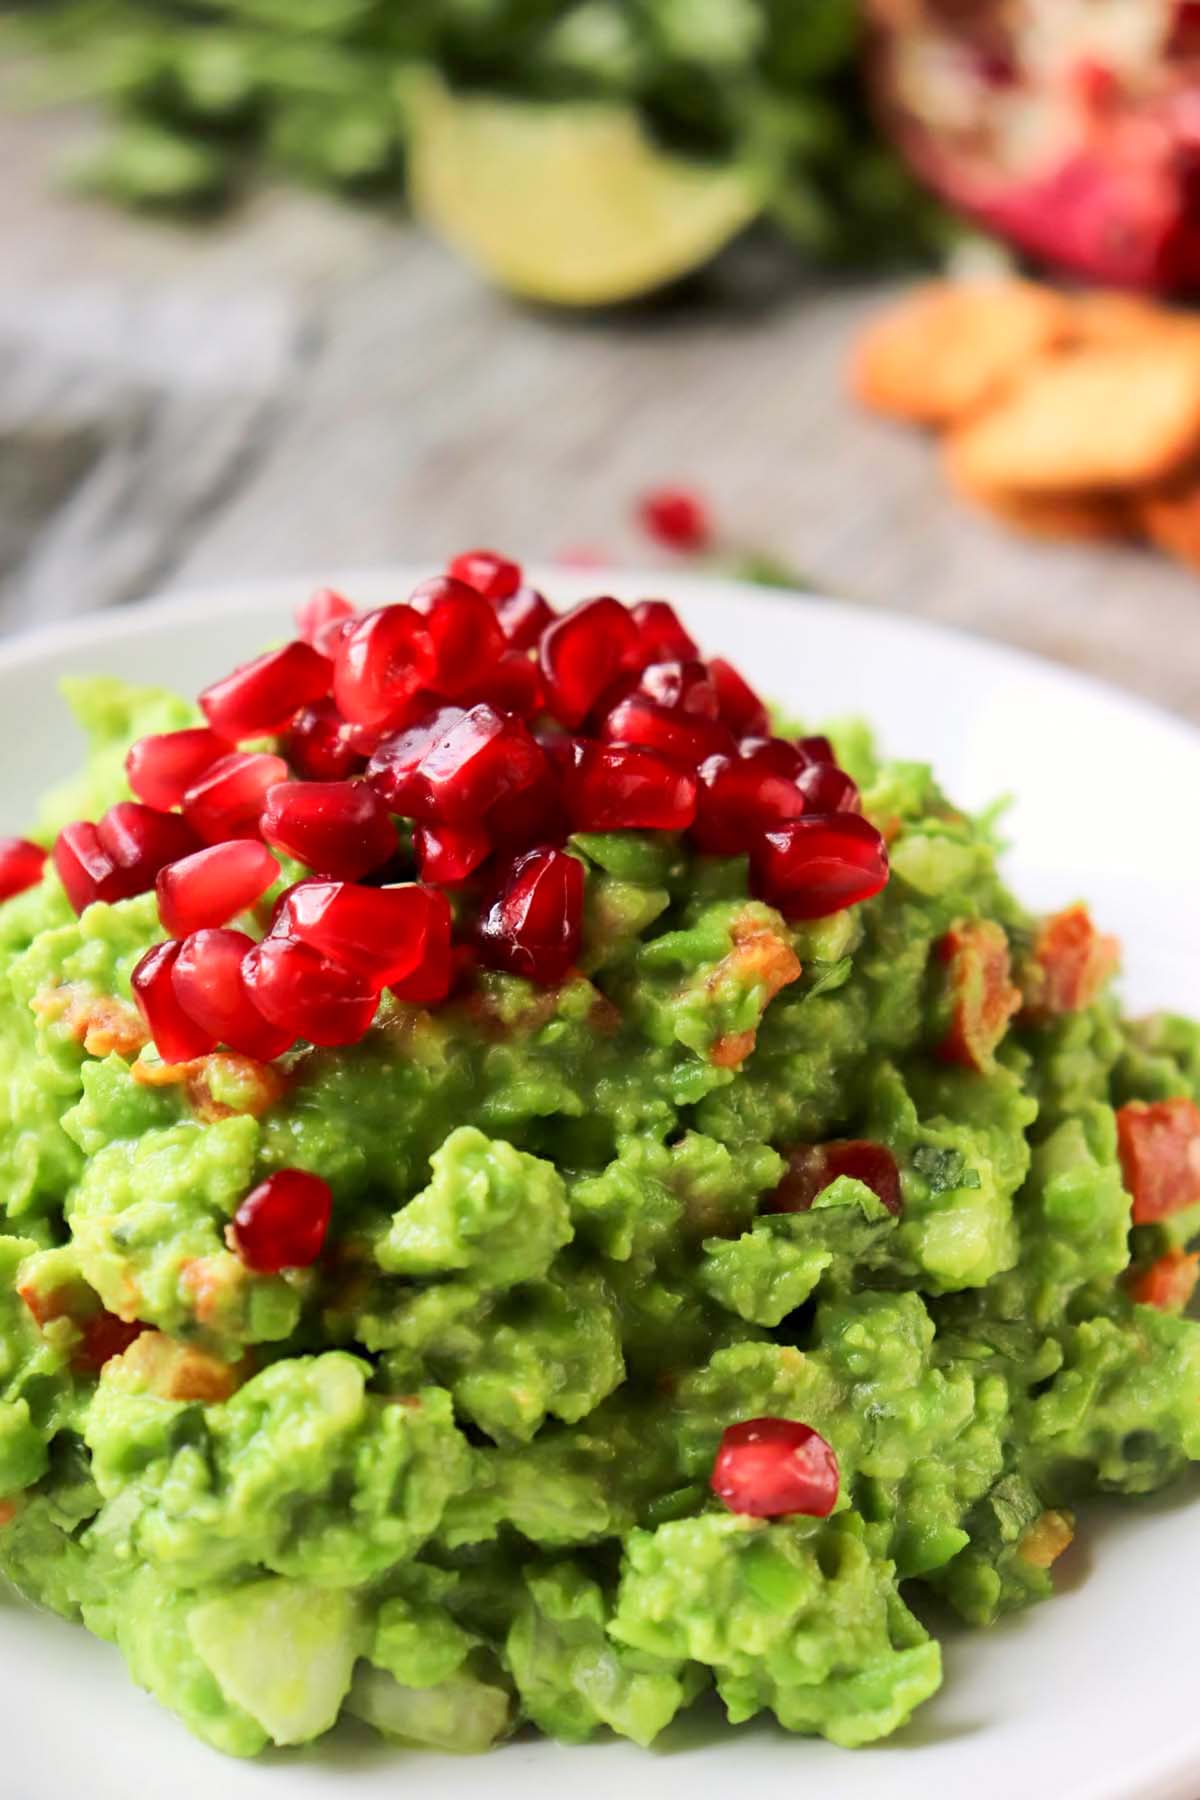 Guacamole topped with pomegranate seeds.